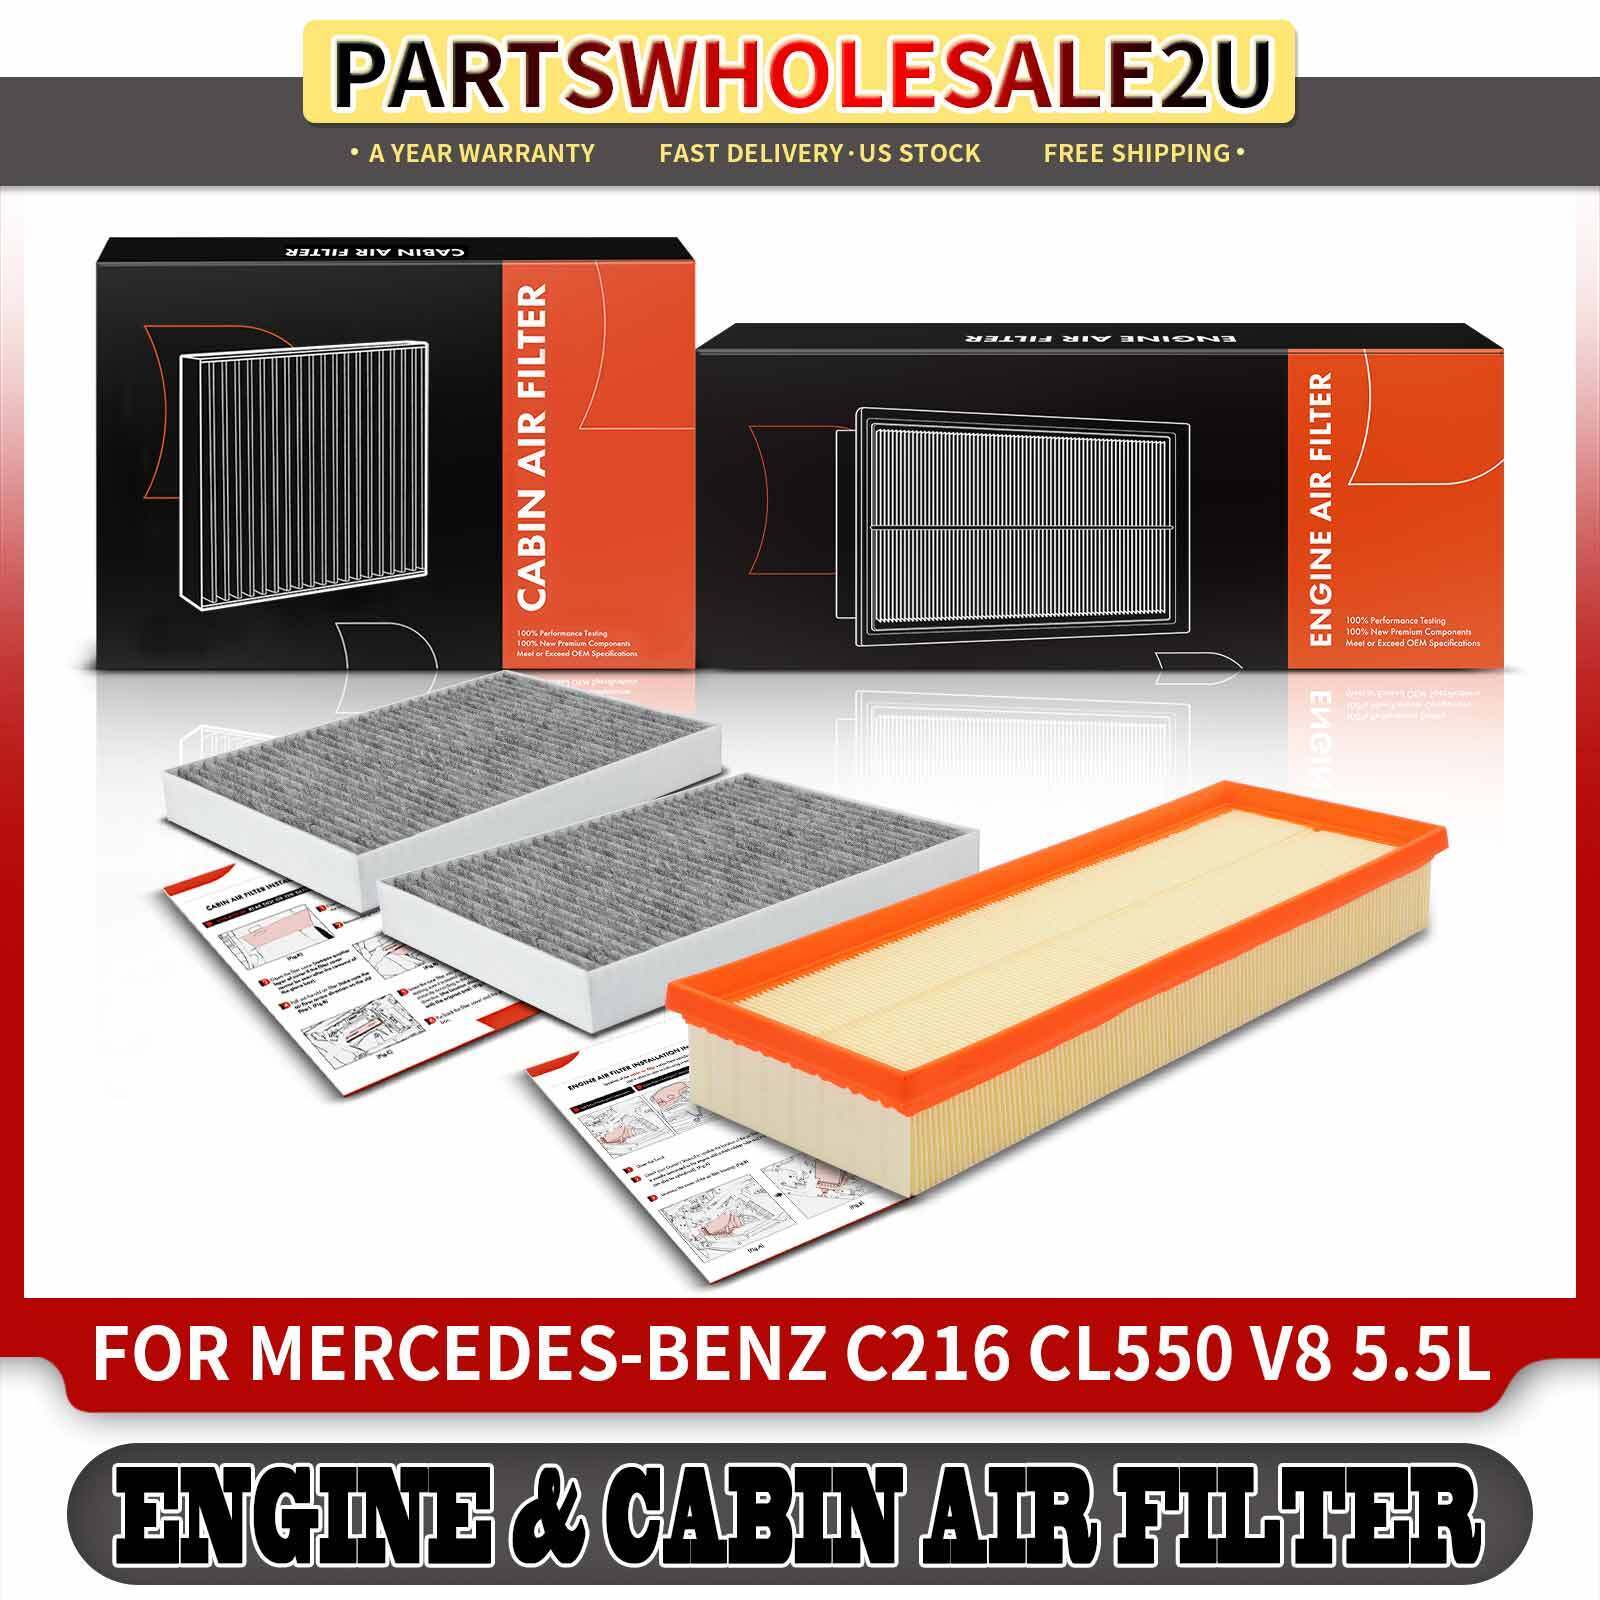 New Engine & Activated Carbon Cabin Air Filter for Mercedes-Benz CL550 S400 S550